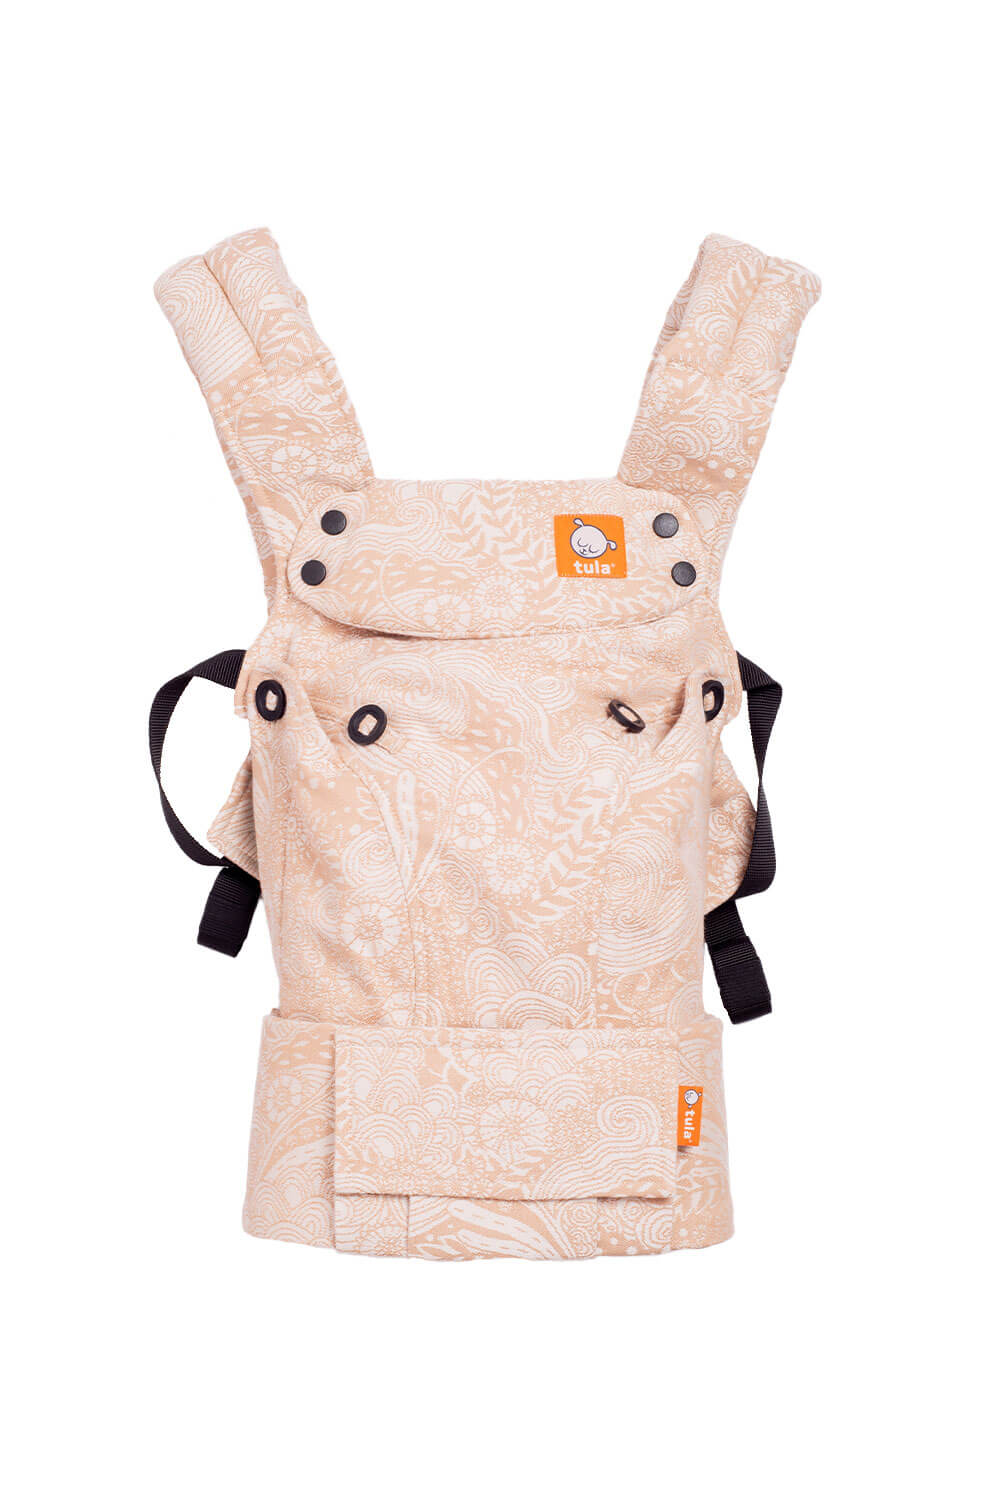 Marina Sunkissed - Signature Woven Explore Baby Carrier